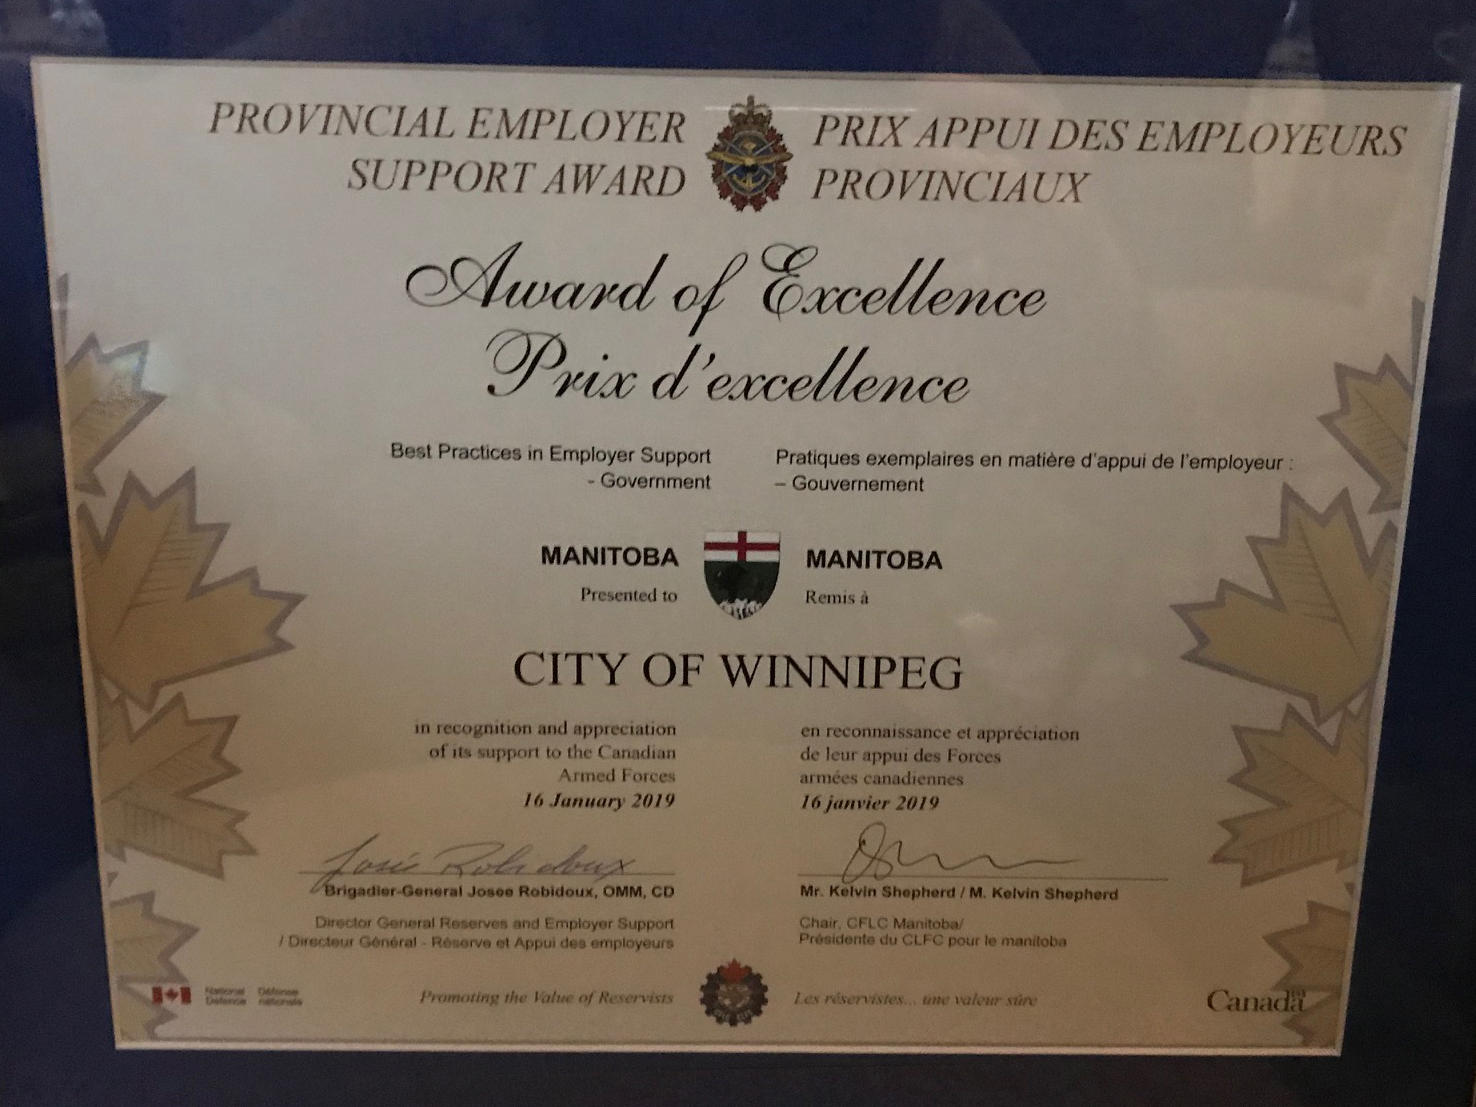 The City of Winnipeg previously received the Best Practices in Employer Support for a Government Organization for Manitoba award in January 2019.